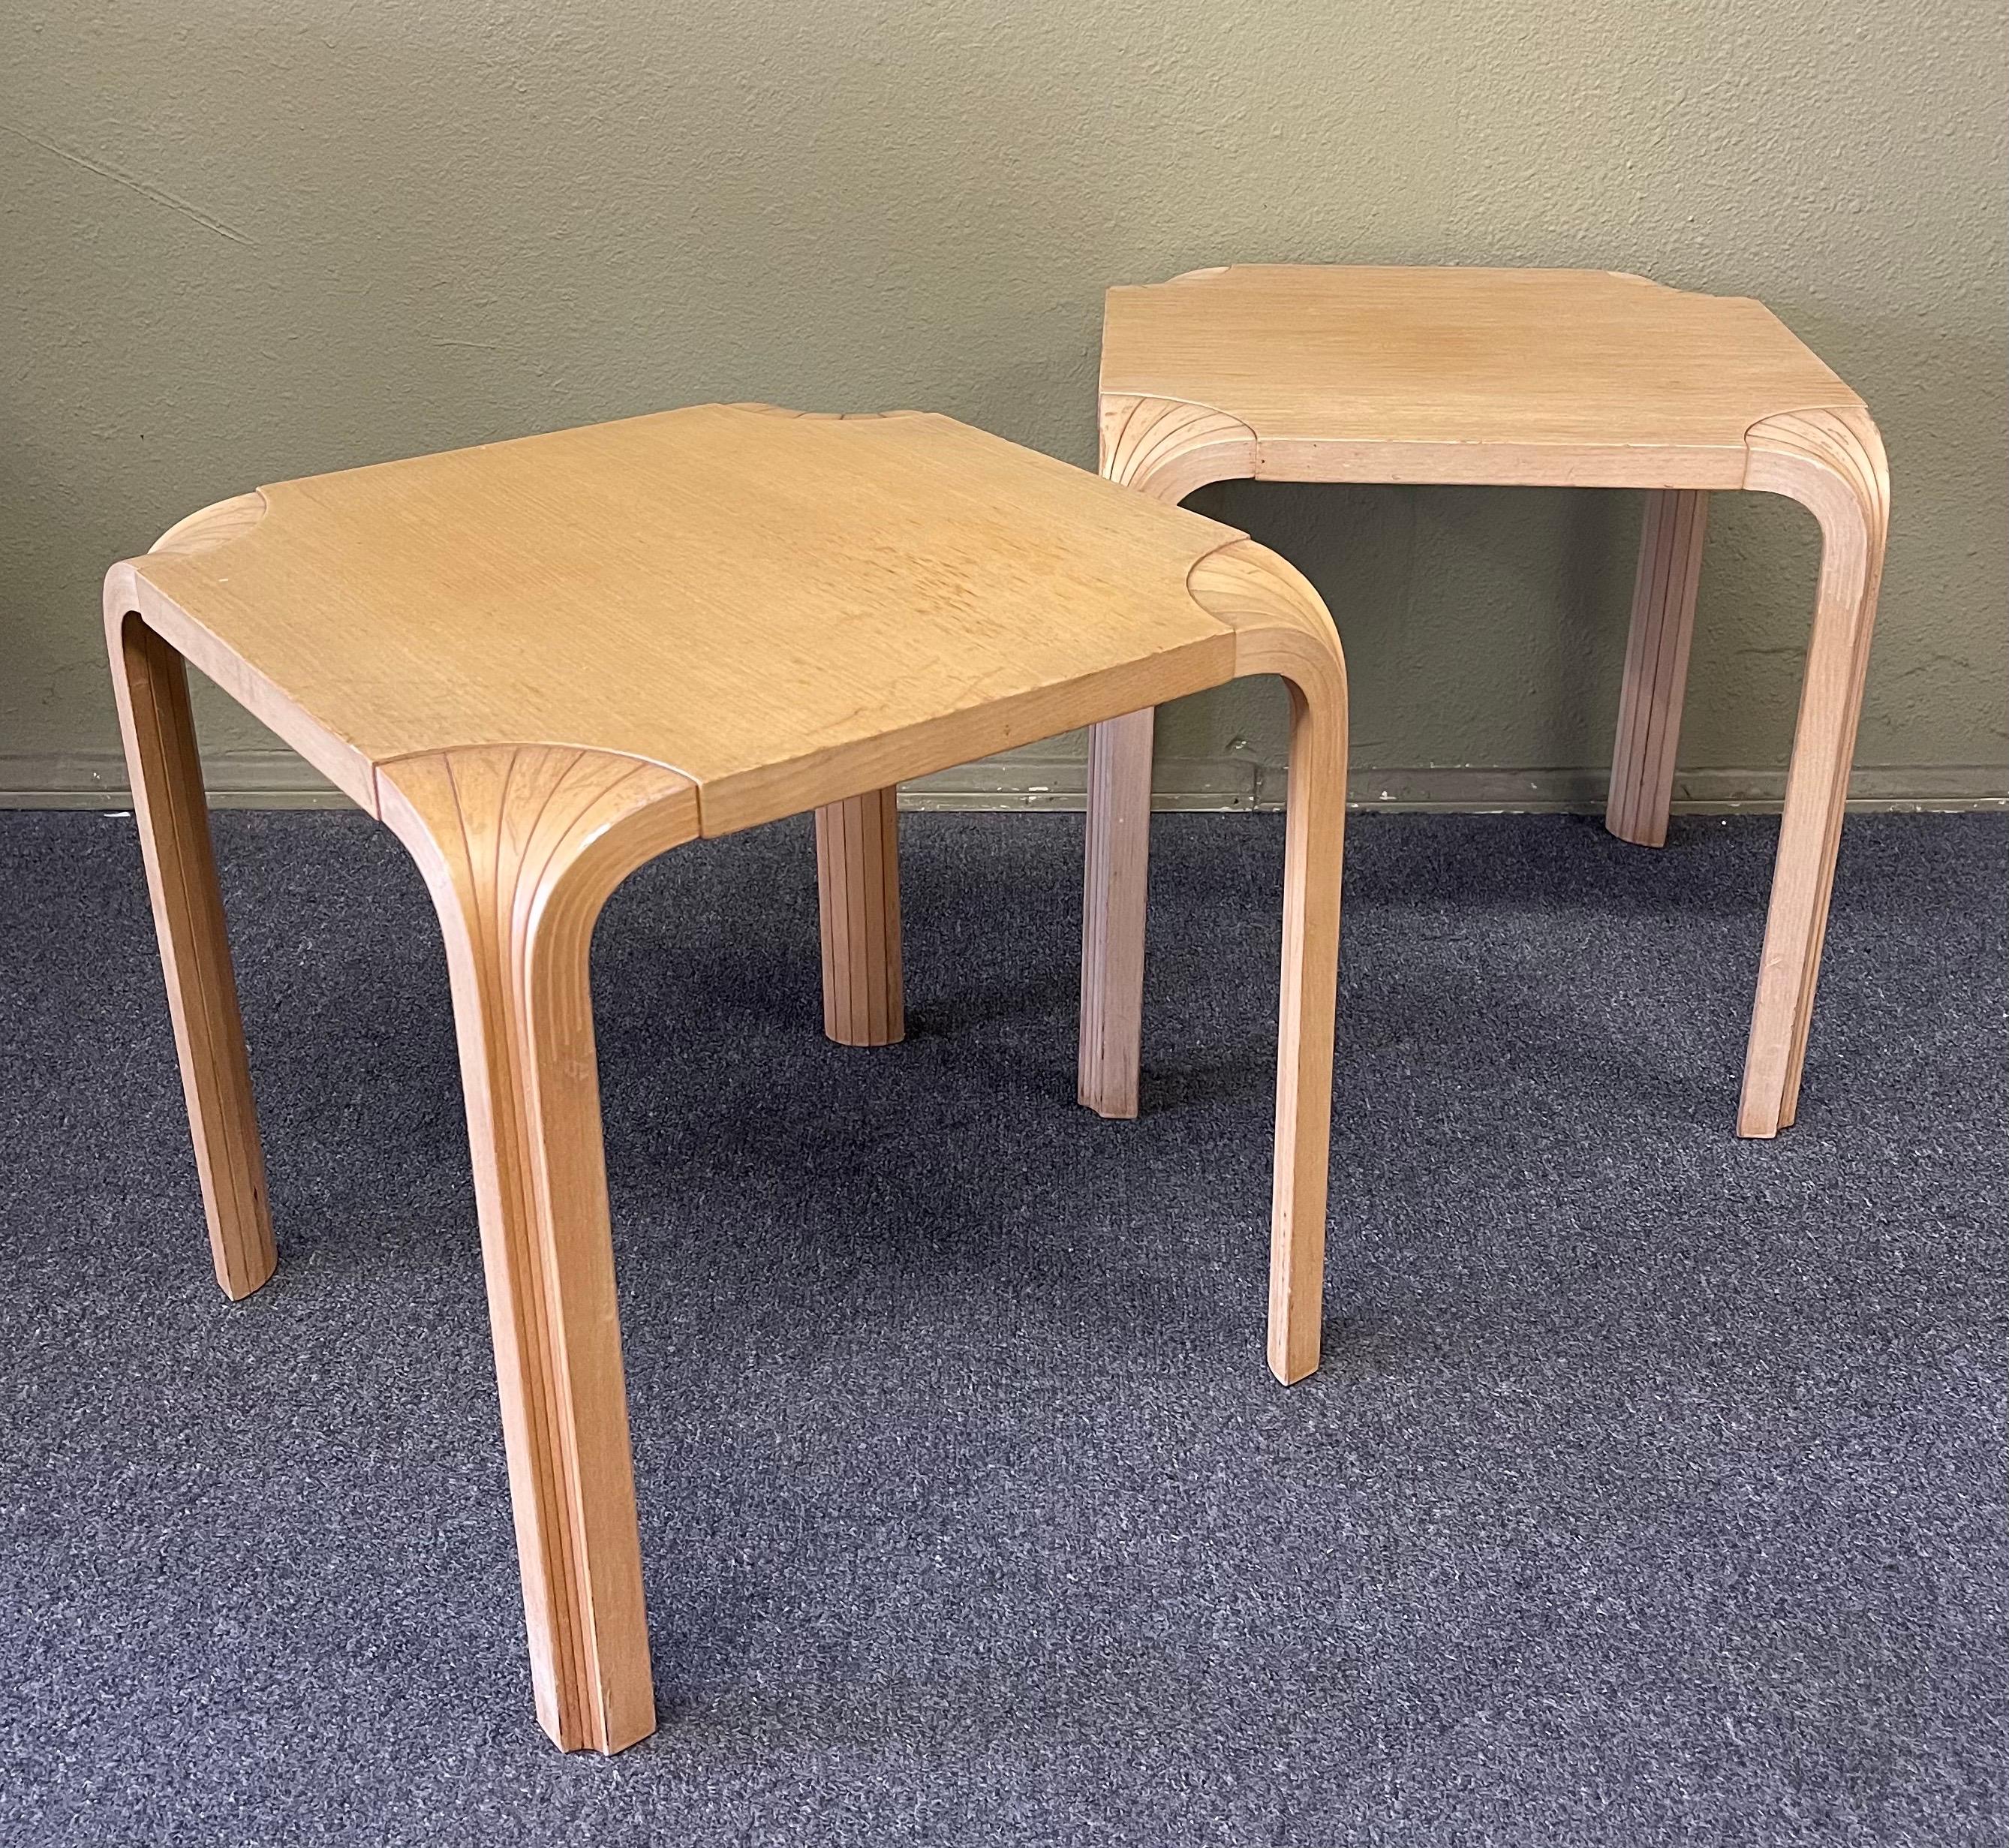 Pair of vintage fan leg side tables / stools by Alvar Aalto Designs for Artek, circa 1950s. The tables are made of birch bentwood with Aalto’s signature feathered bentwood leg design; made in Finland. The tables are in fair original vintage